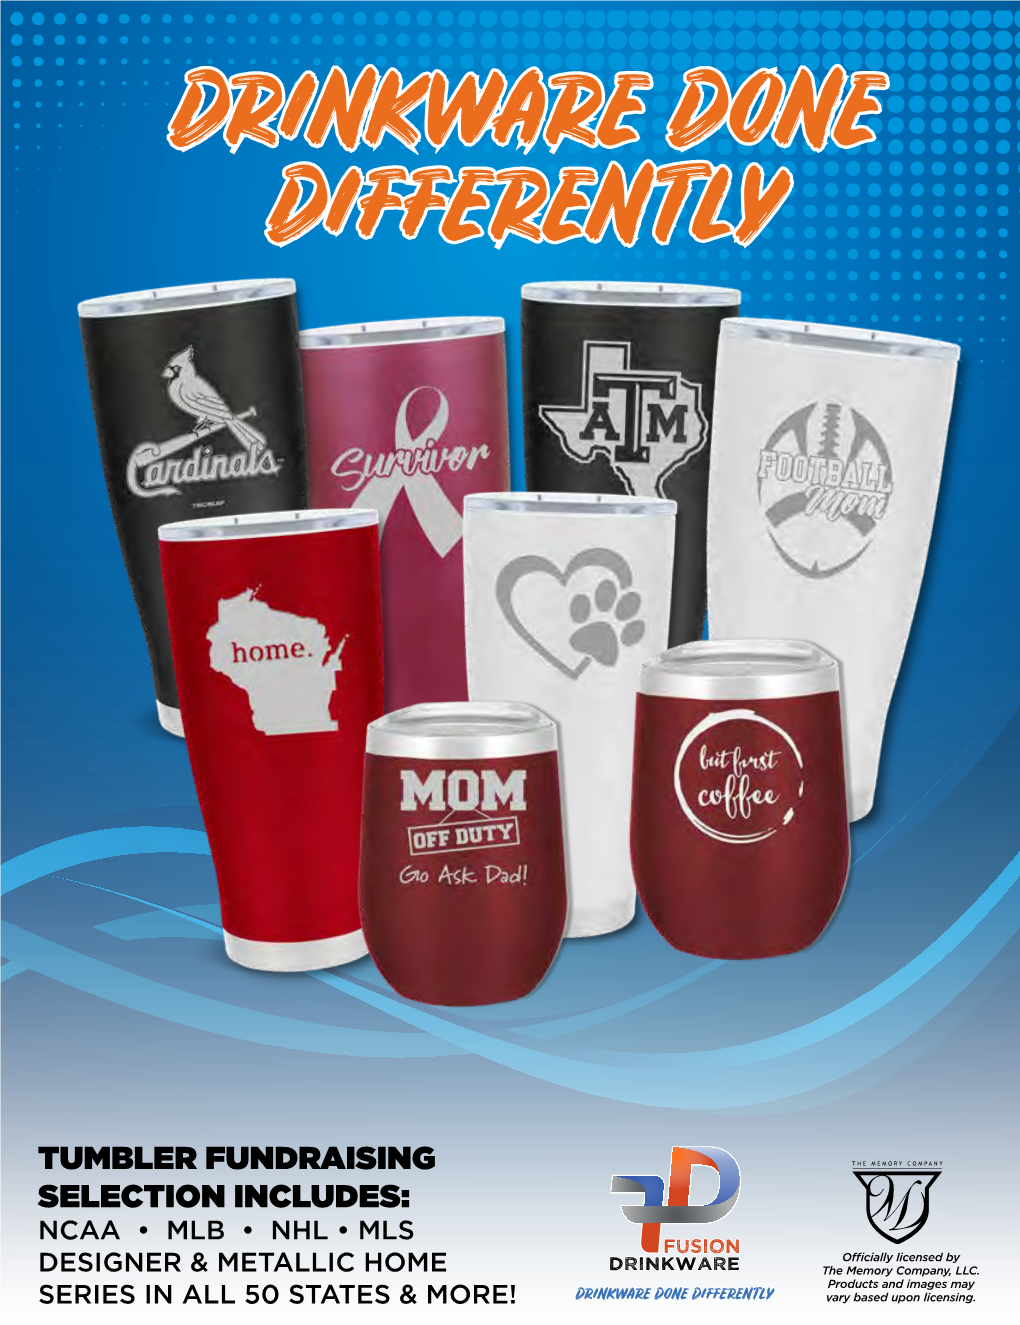 Drinkware Done Differently